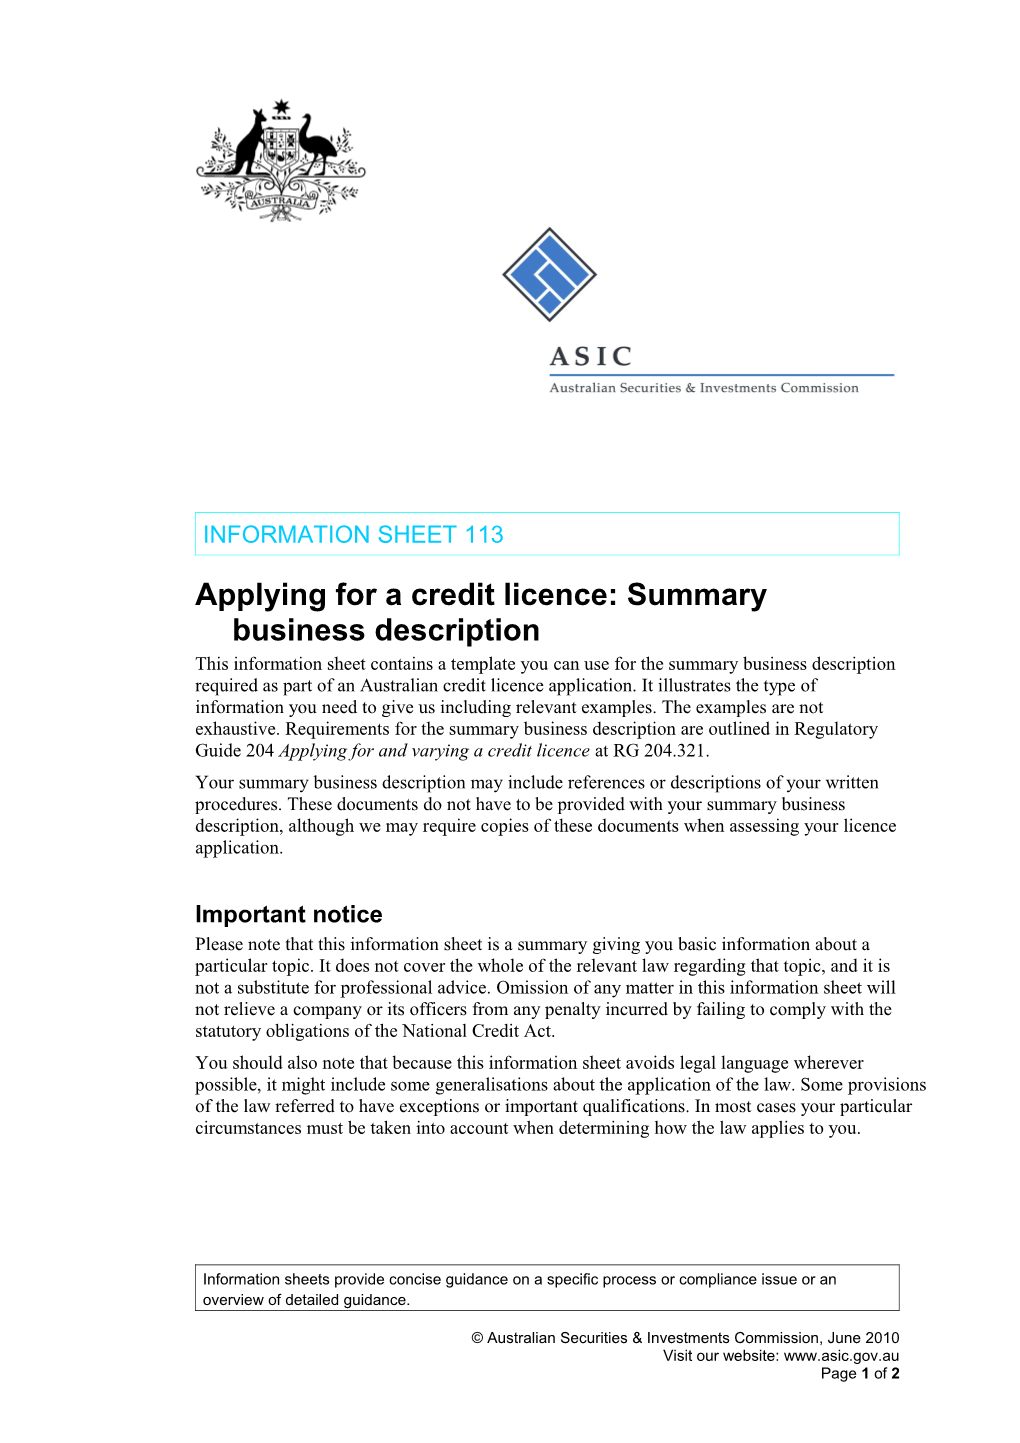 Applying for a Credit Licence: Summary Business Description